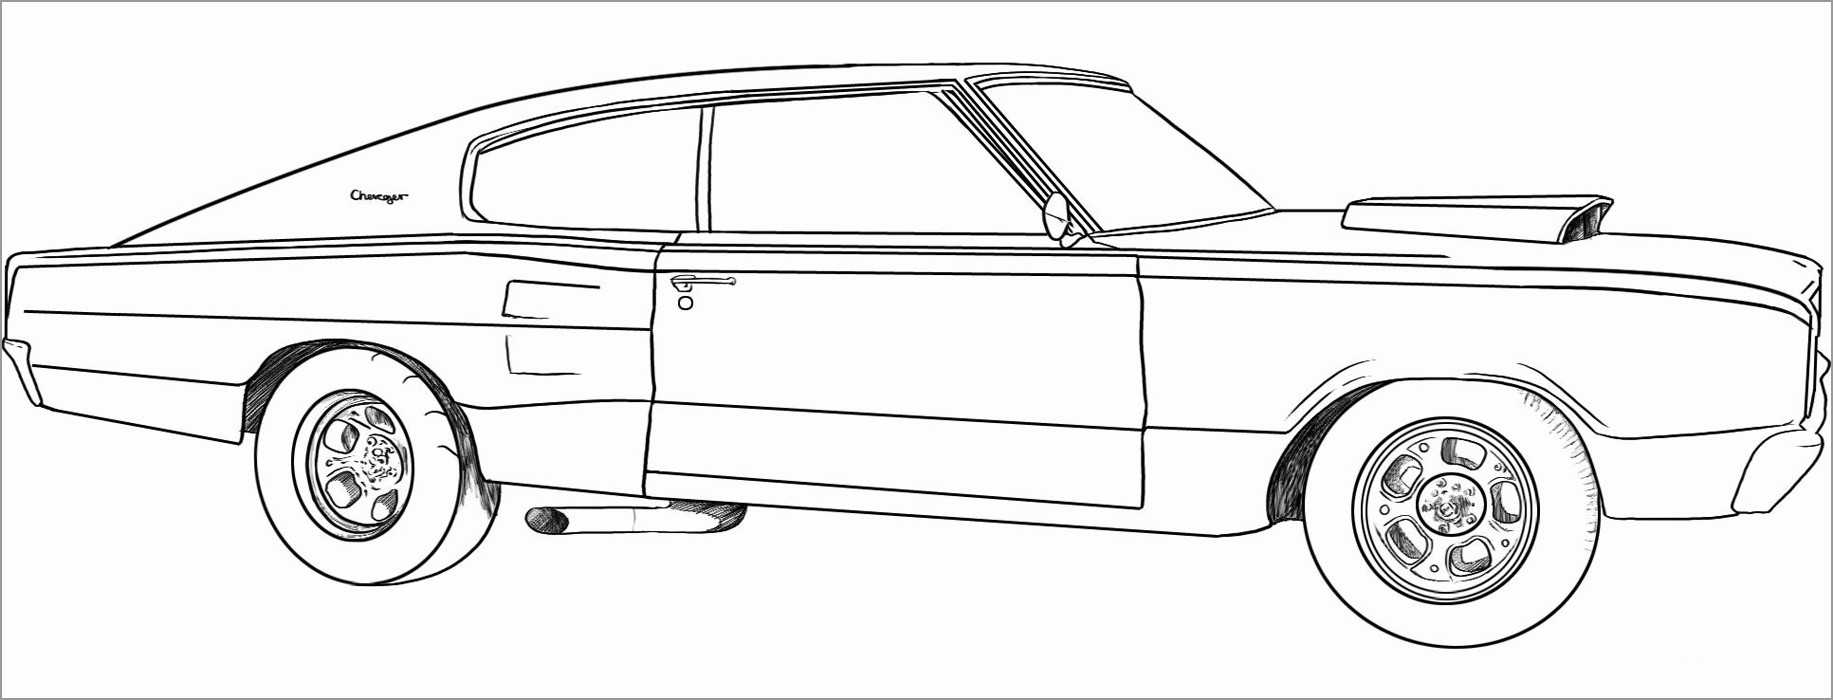 American Muscle Car Coloring Pages